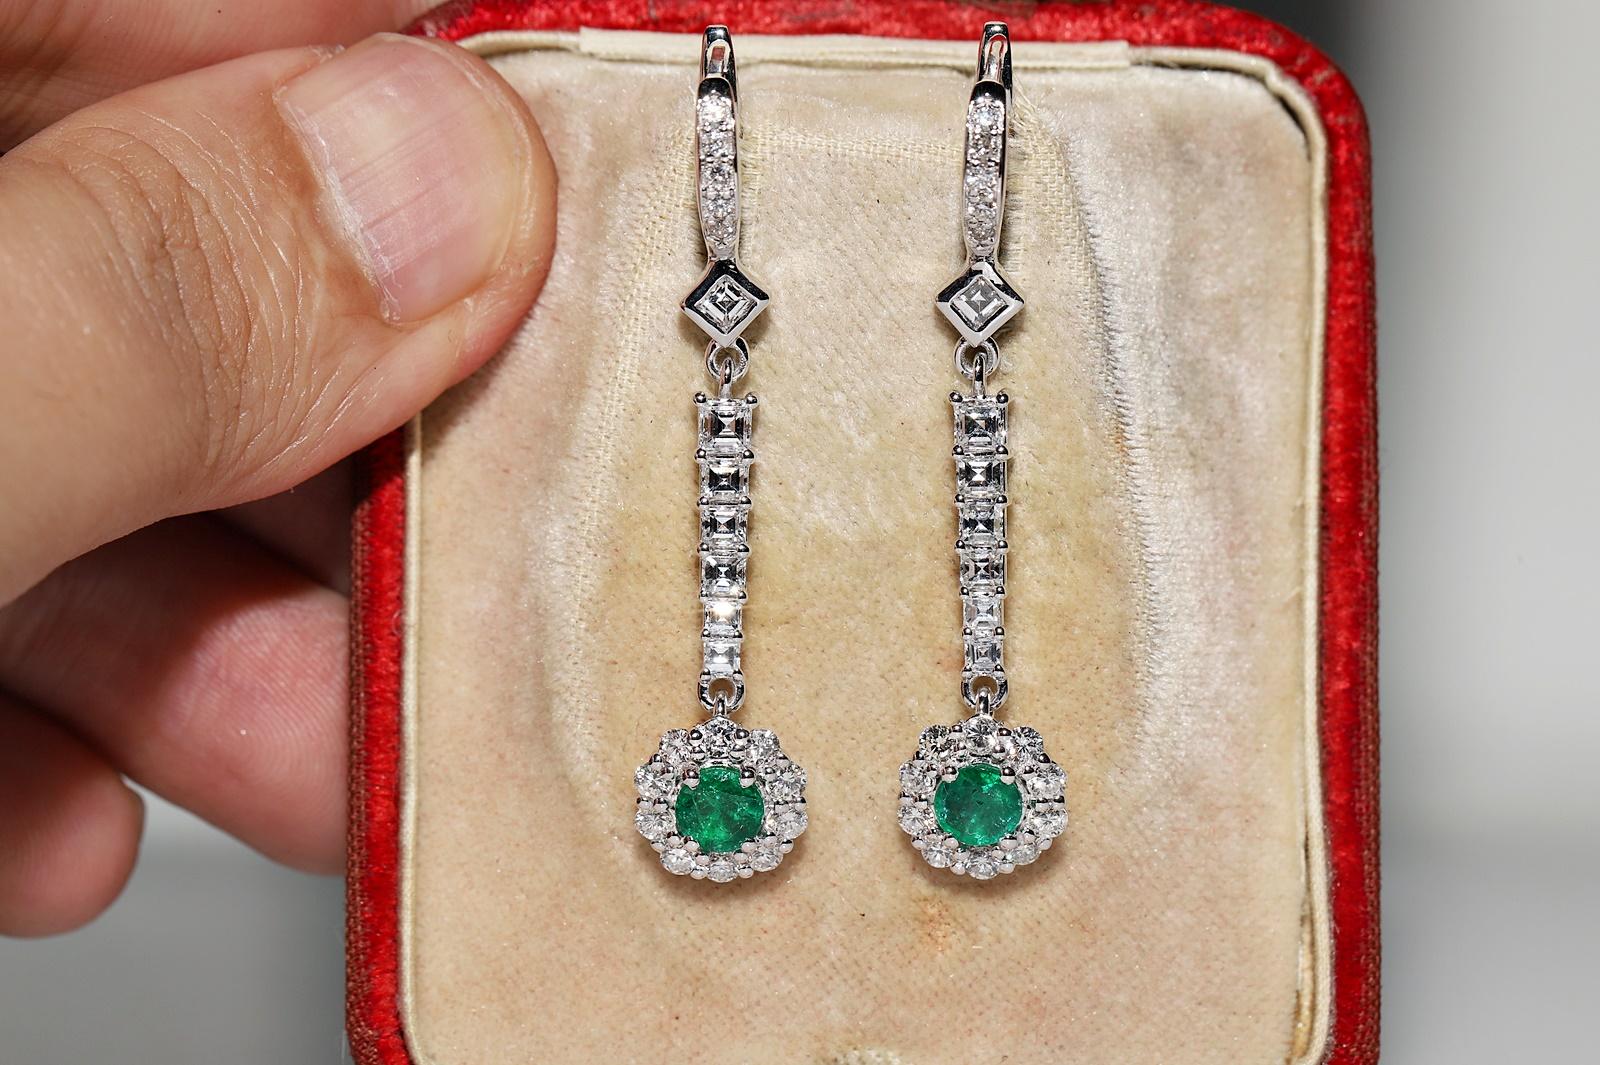 In very good condition.
Total weight is 8.1 grams.
Totally is diamond 2.20 ct.
The diamond is has F-G color and vvs-vs clarity.
Totally is emerald 1.20 ct.
Box is not included.
Please contact for any questions.